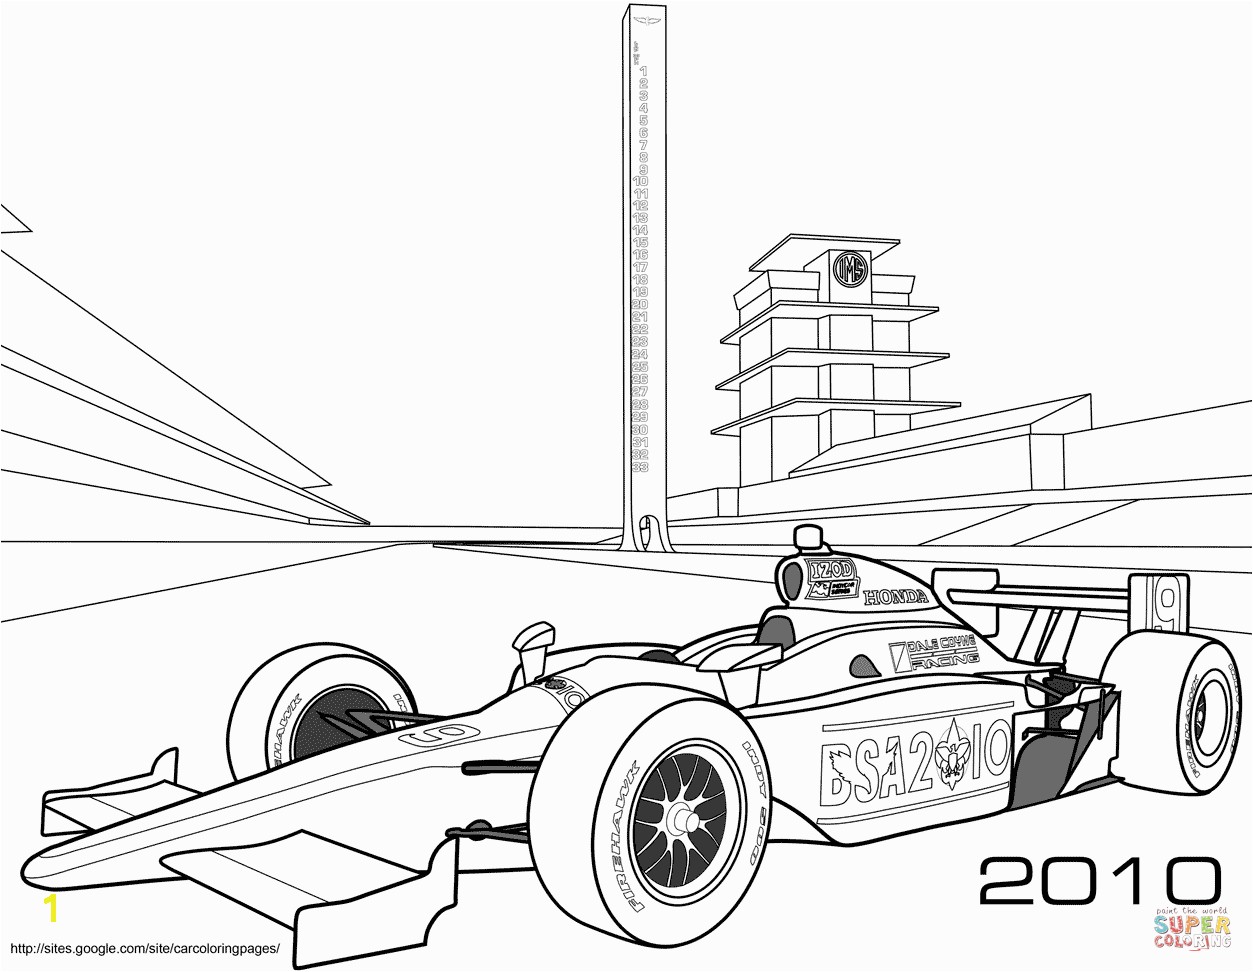 Coloring Page Of A Race Car Race Car Coloring Page